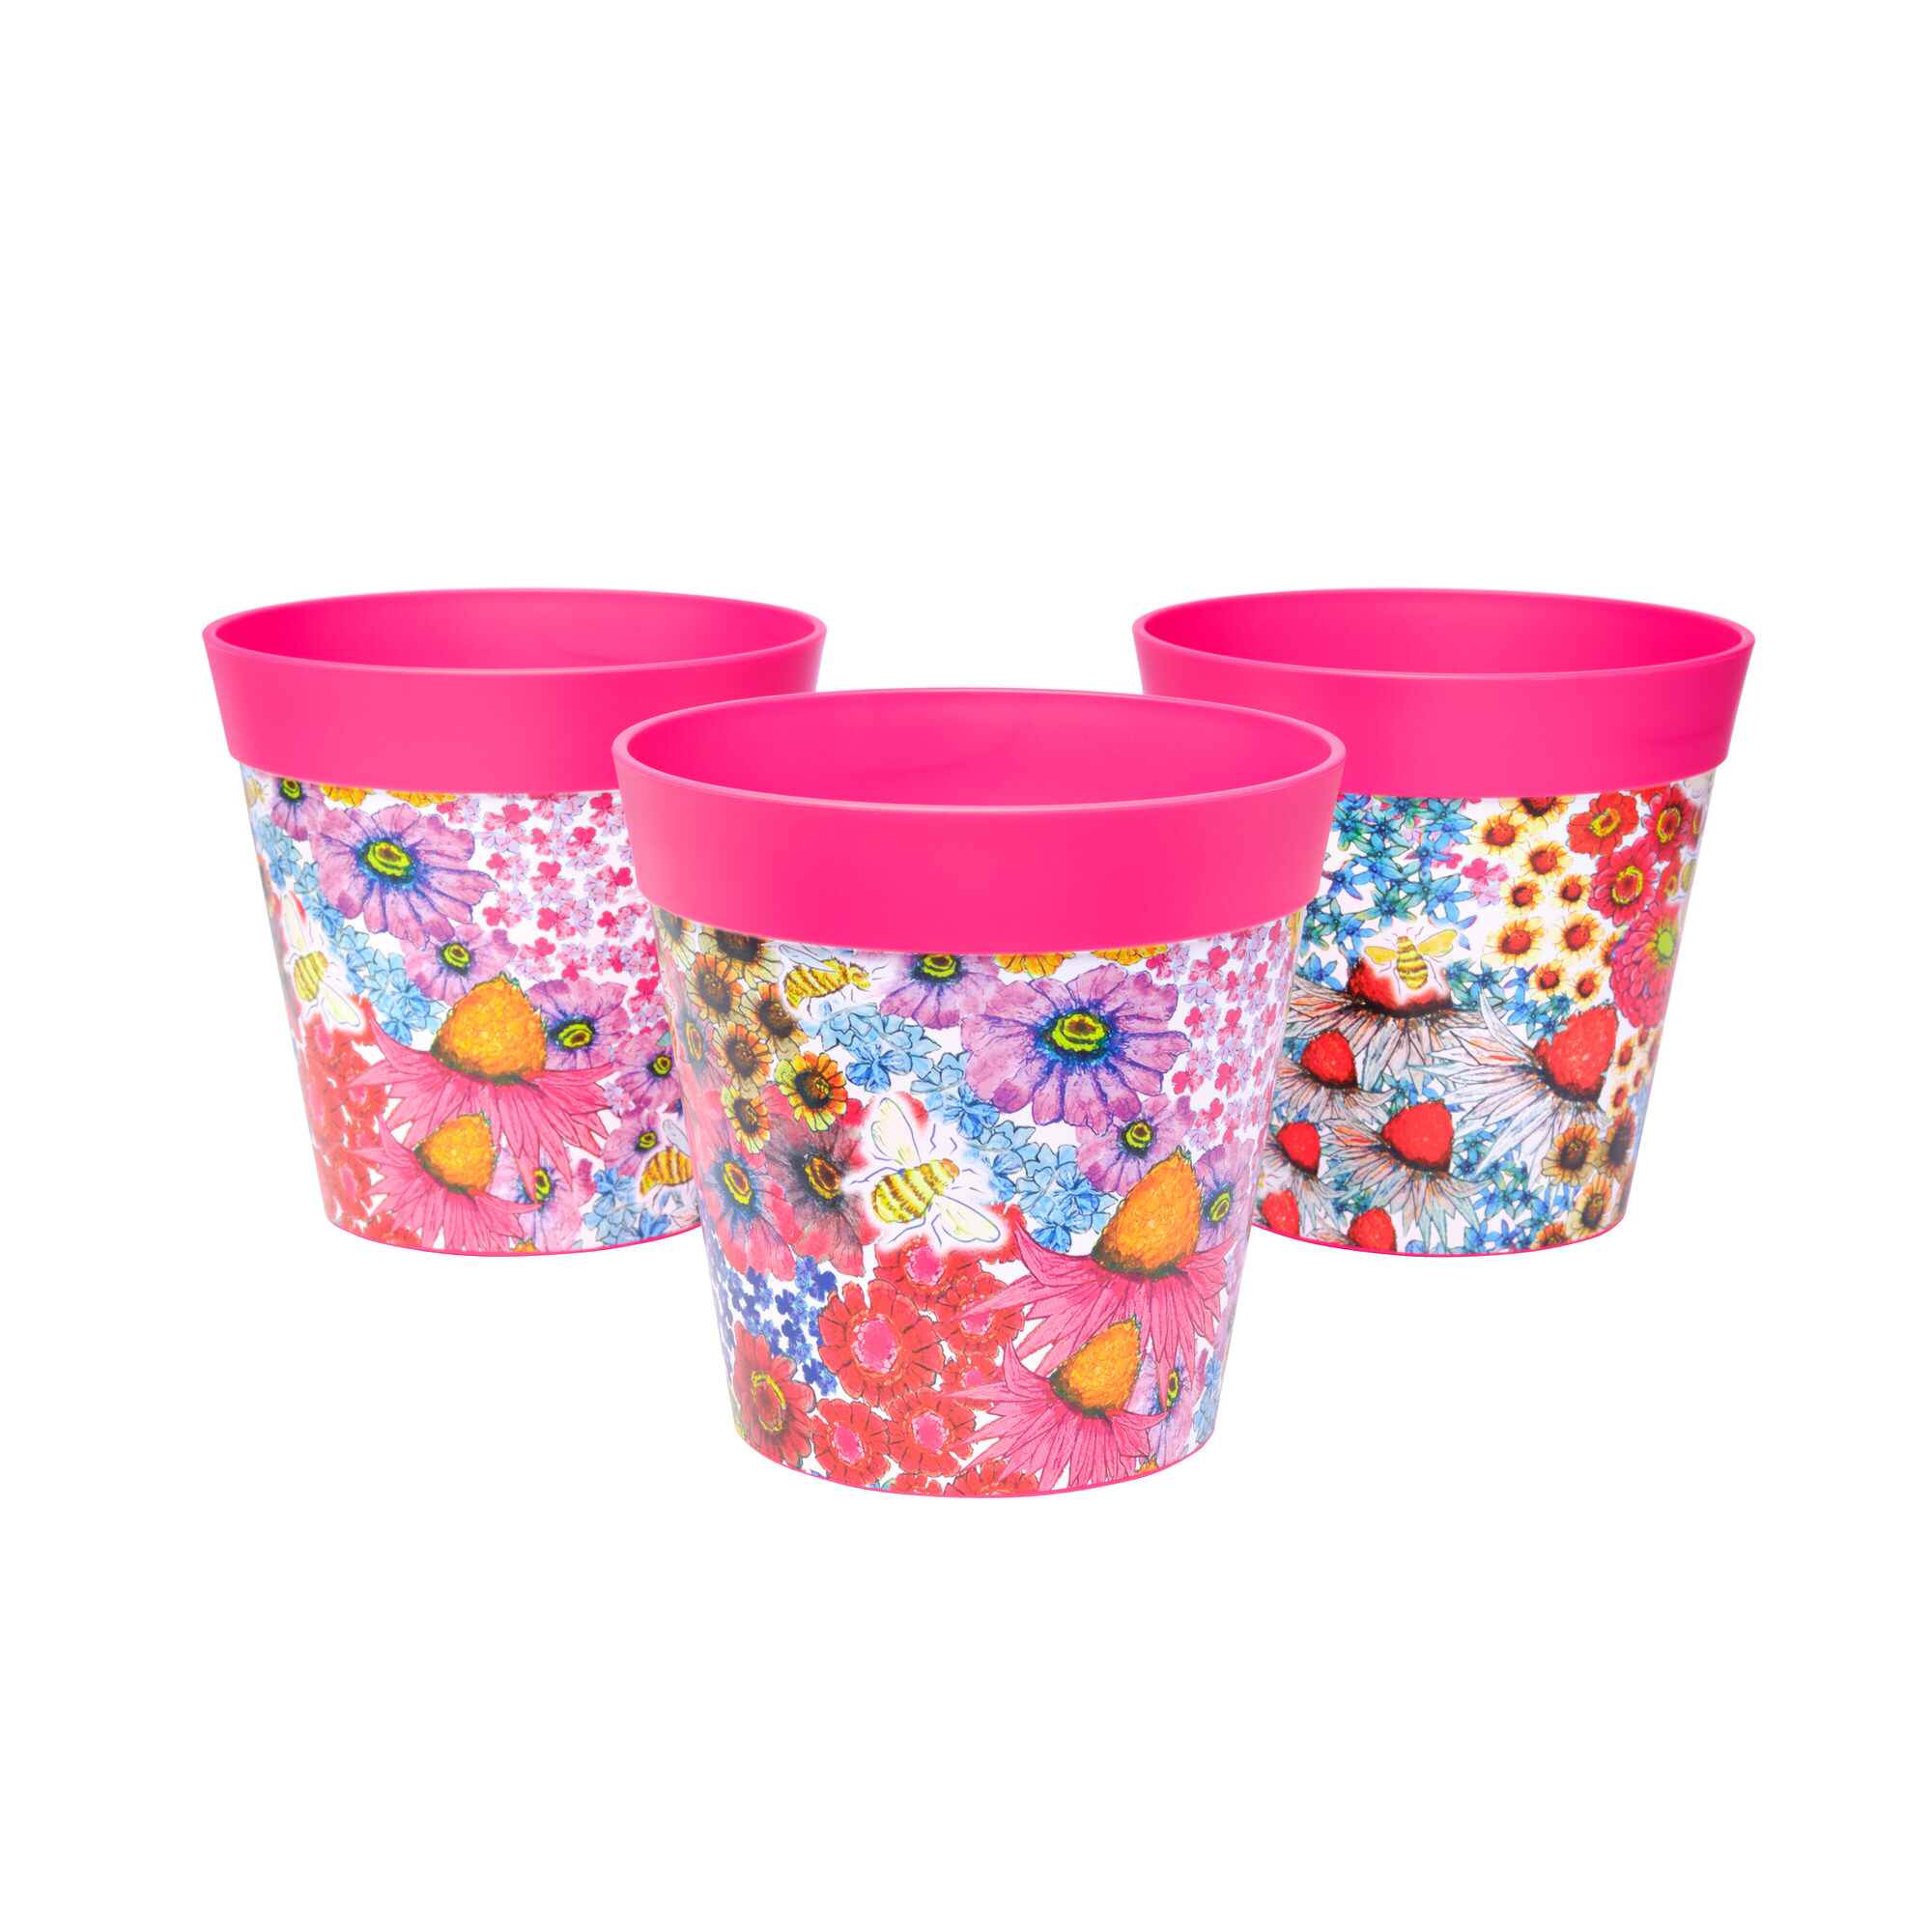 Picture of 3 Small 15cm Plastic Pink Flowers and Bees Pattern Indoor/Outdoor Flowerpots